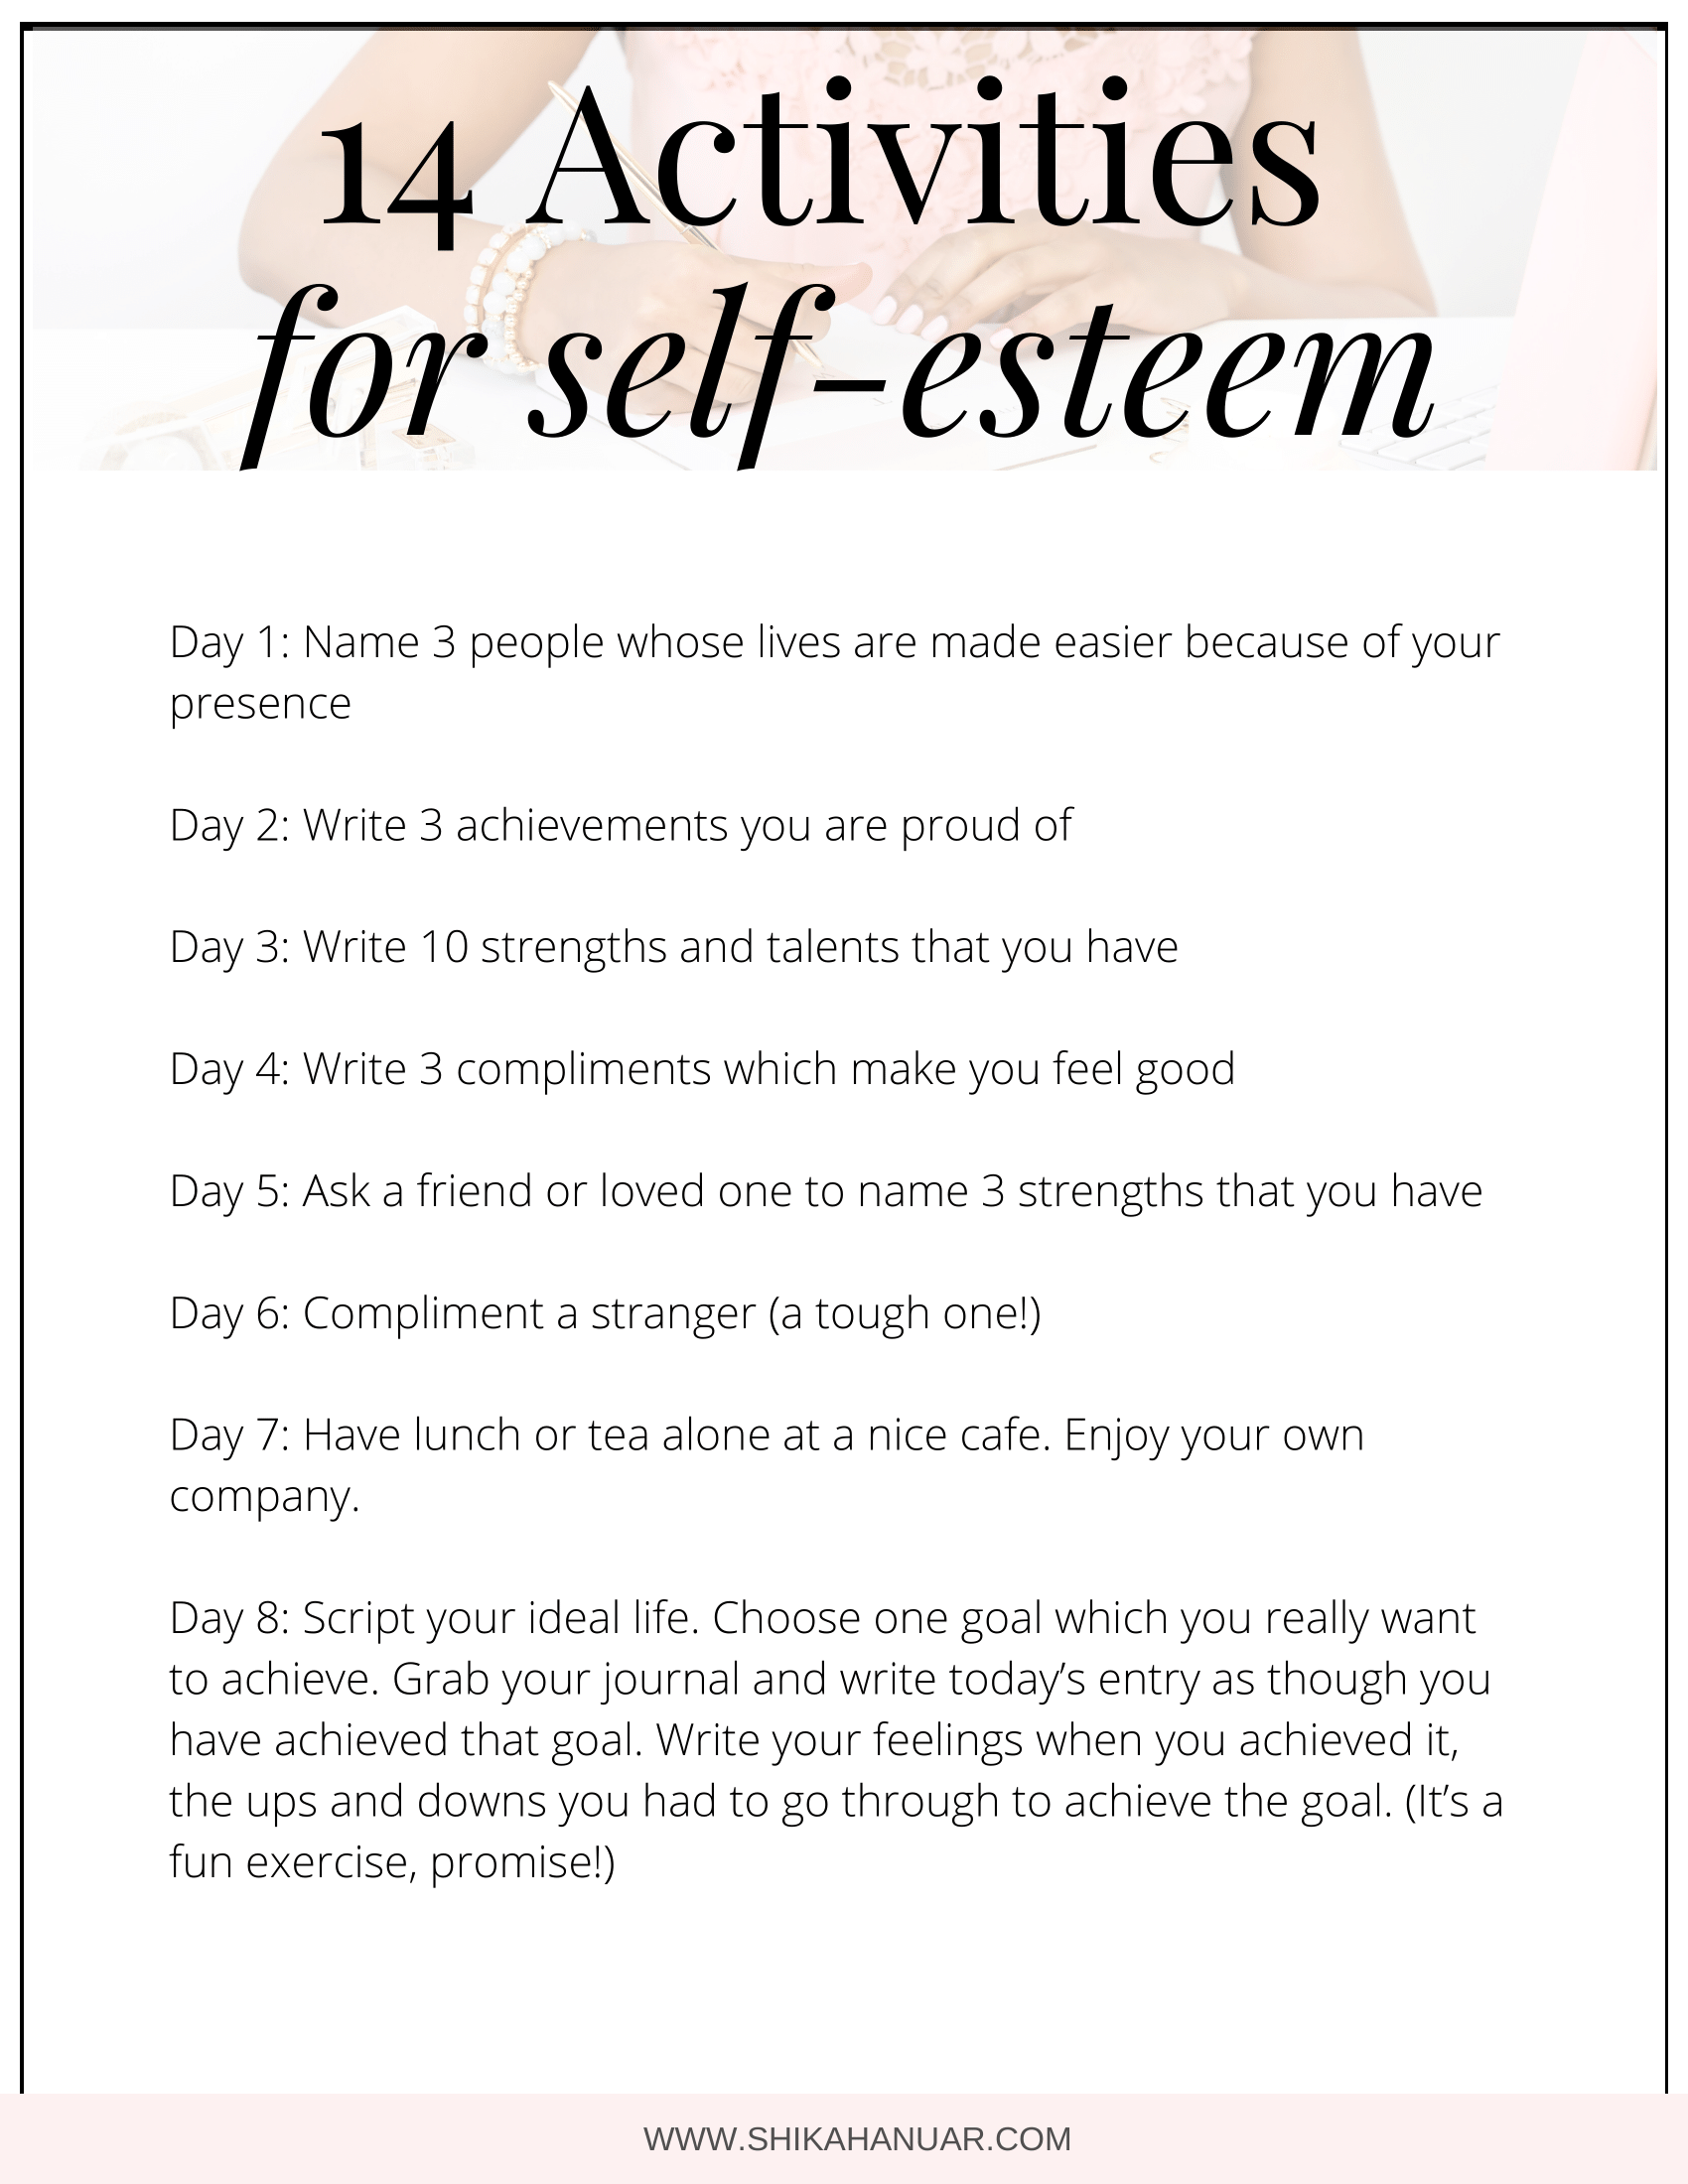 14 Activities To Build Your Self-Esteem And Self-Worth